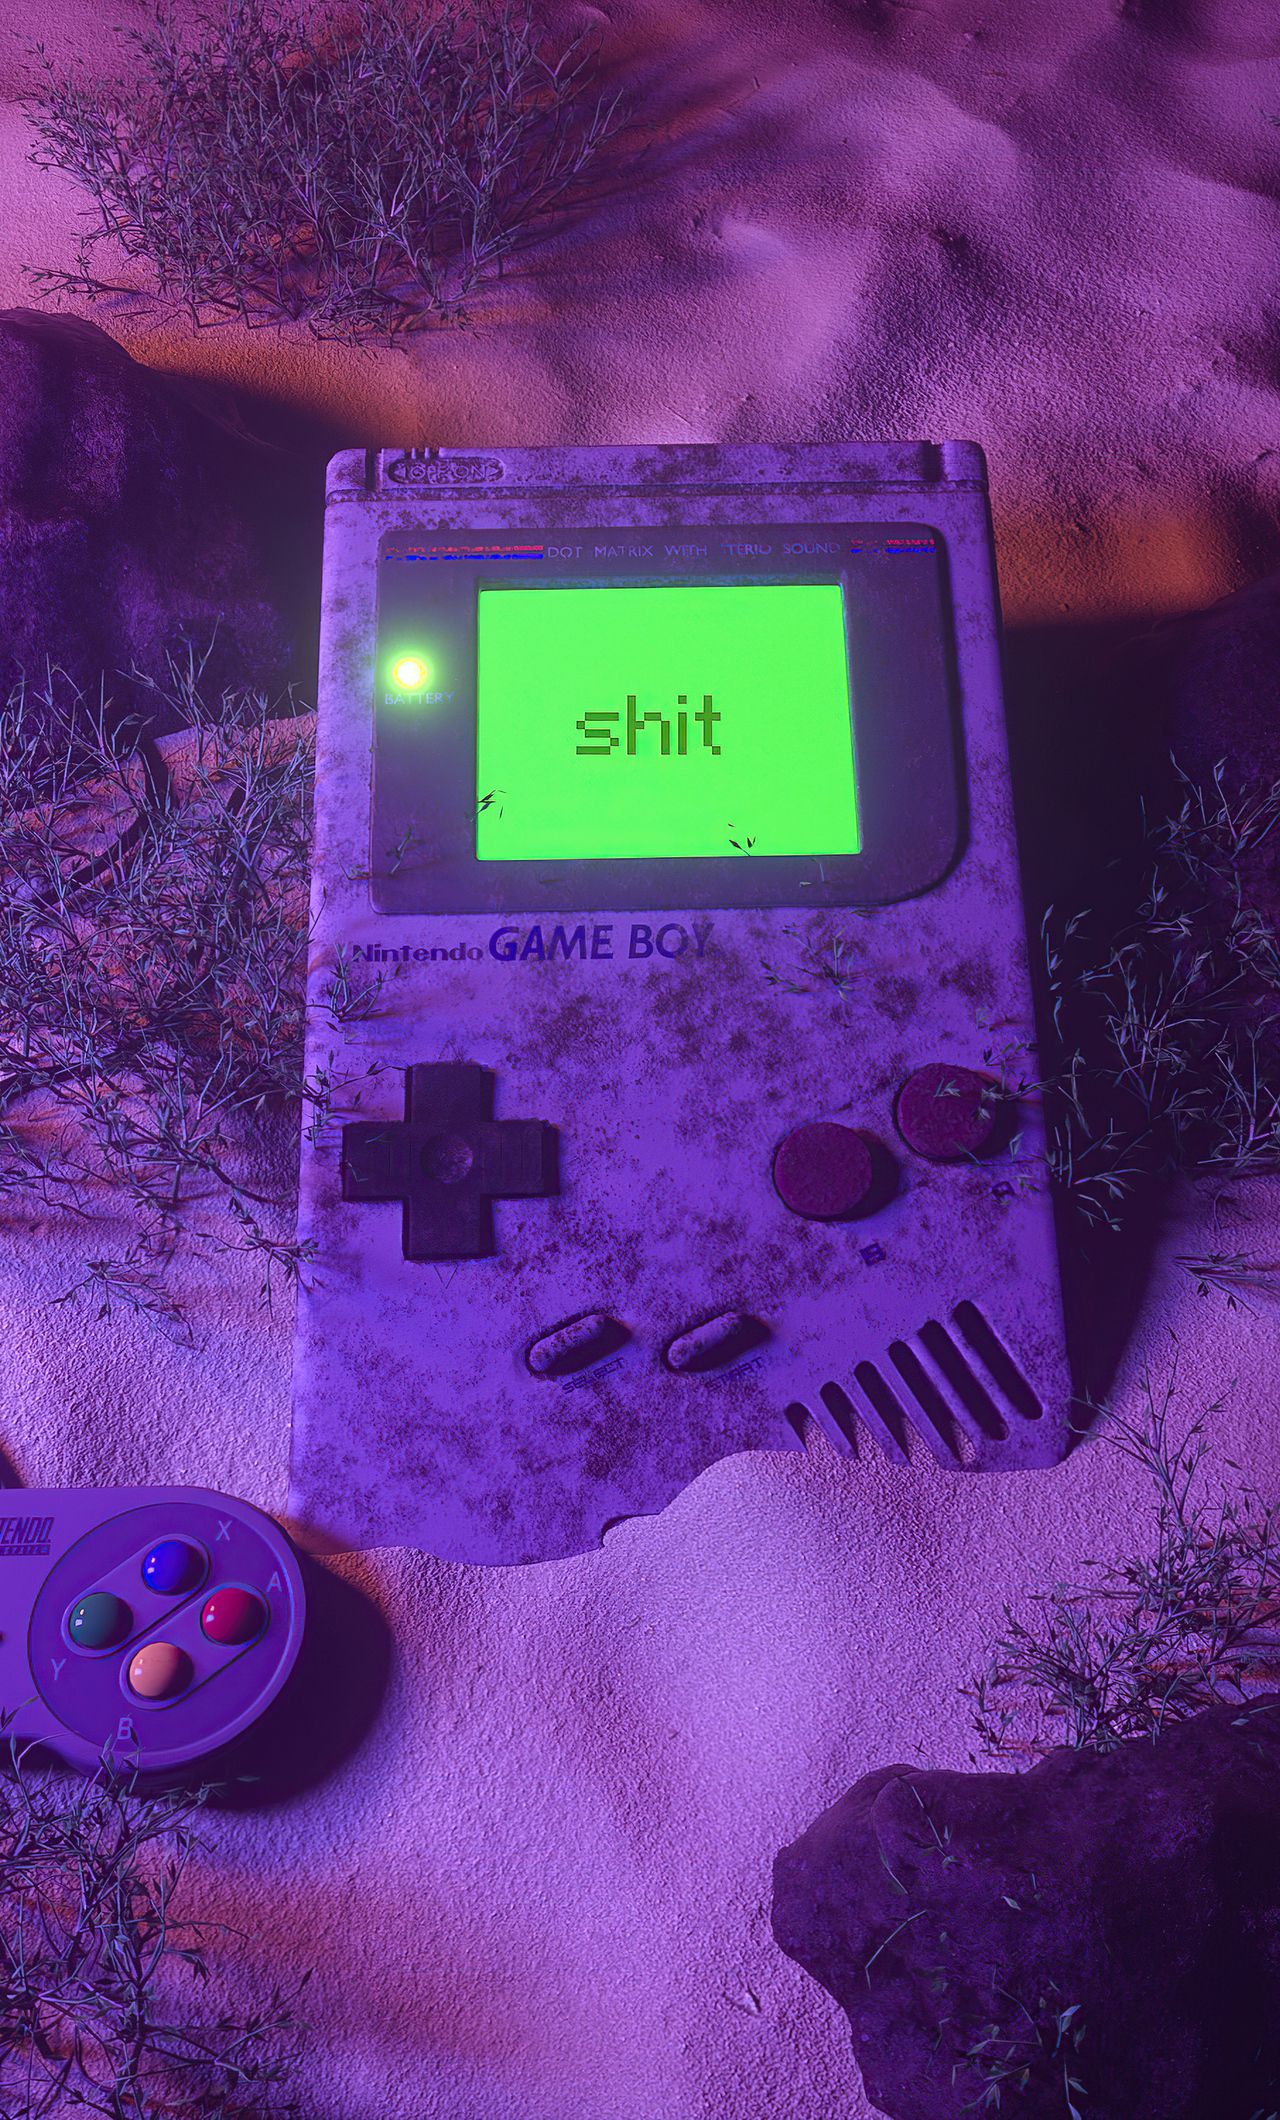 A dirty Gameboy is shown with the word 